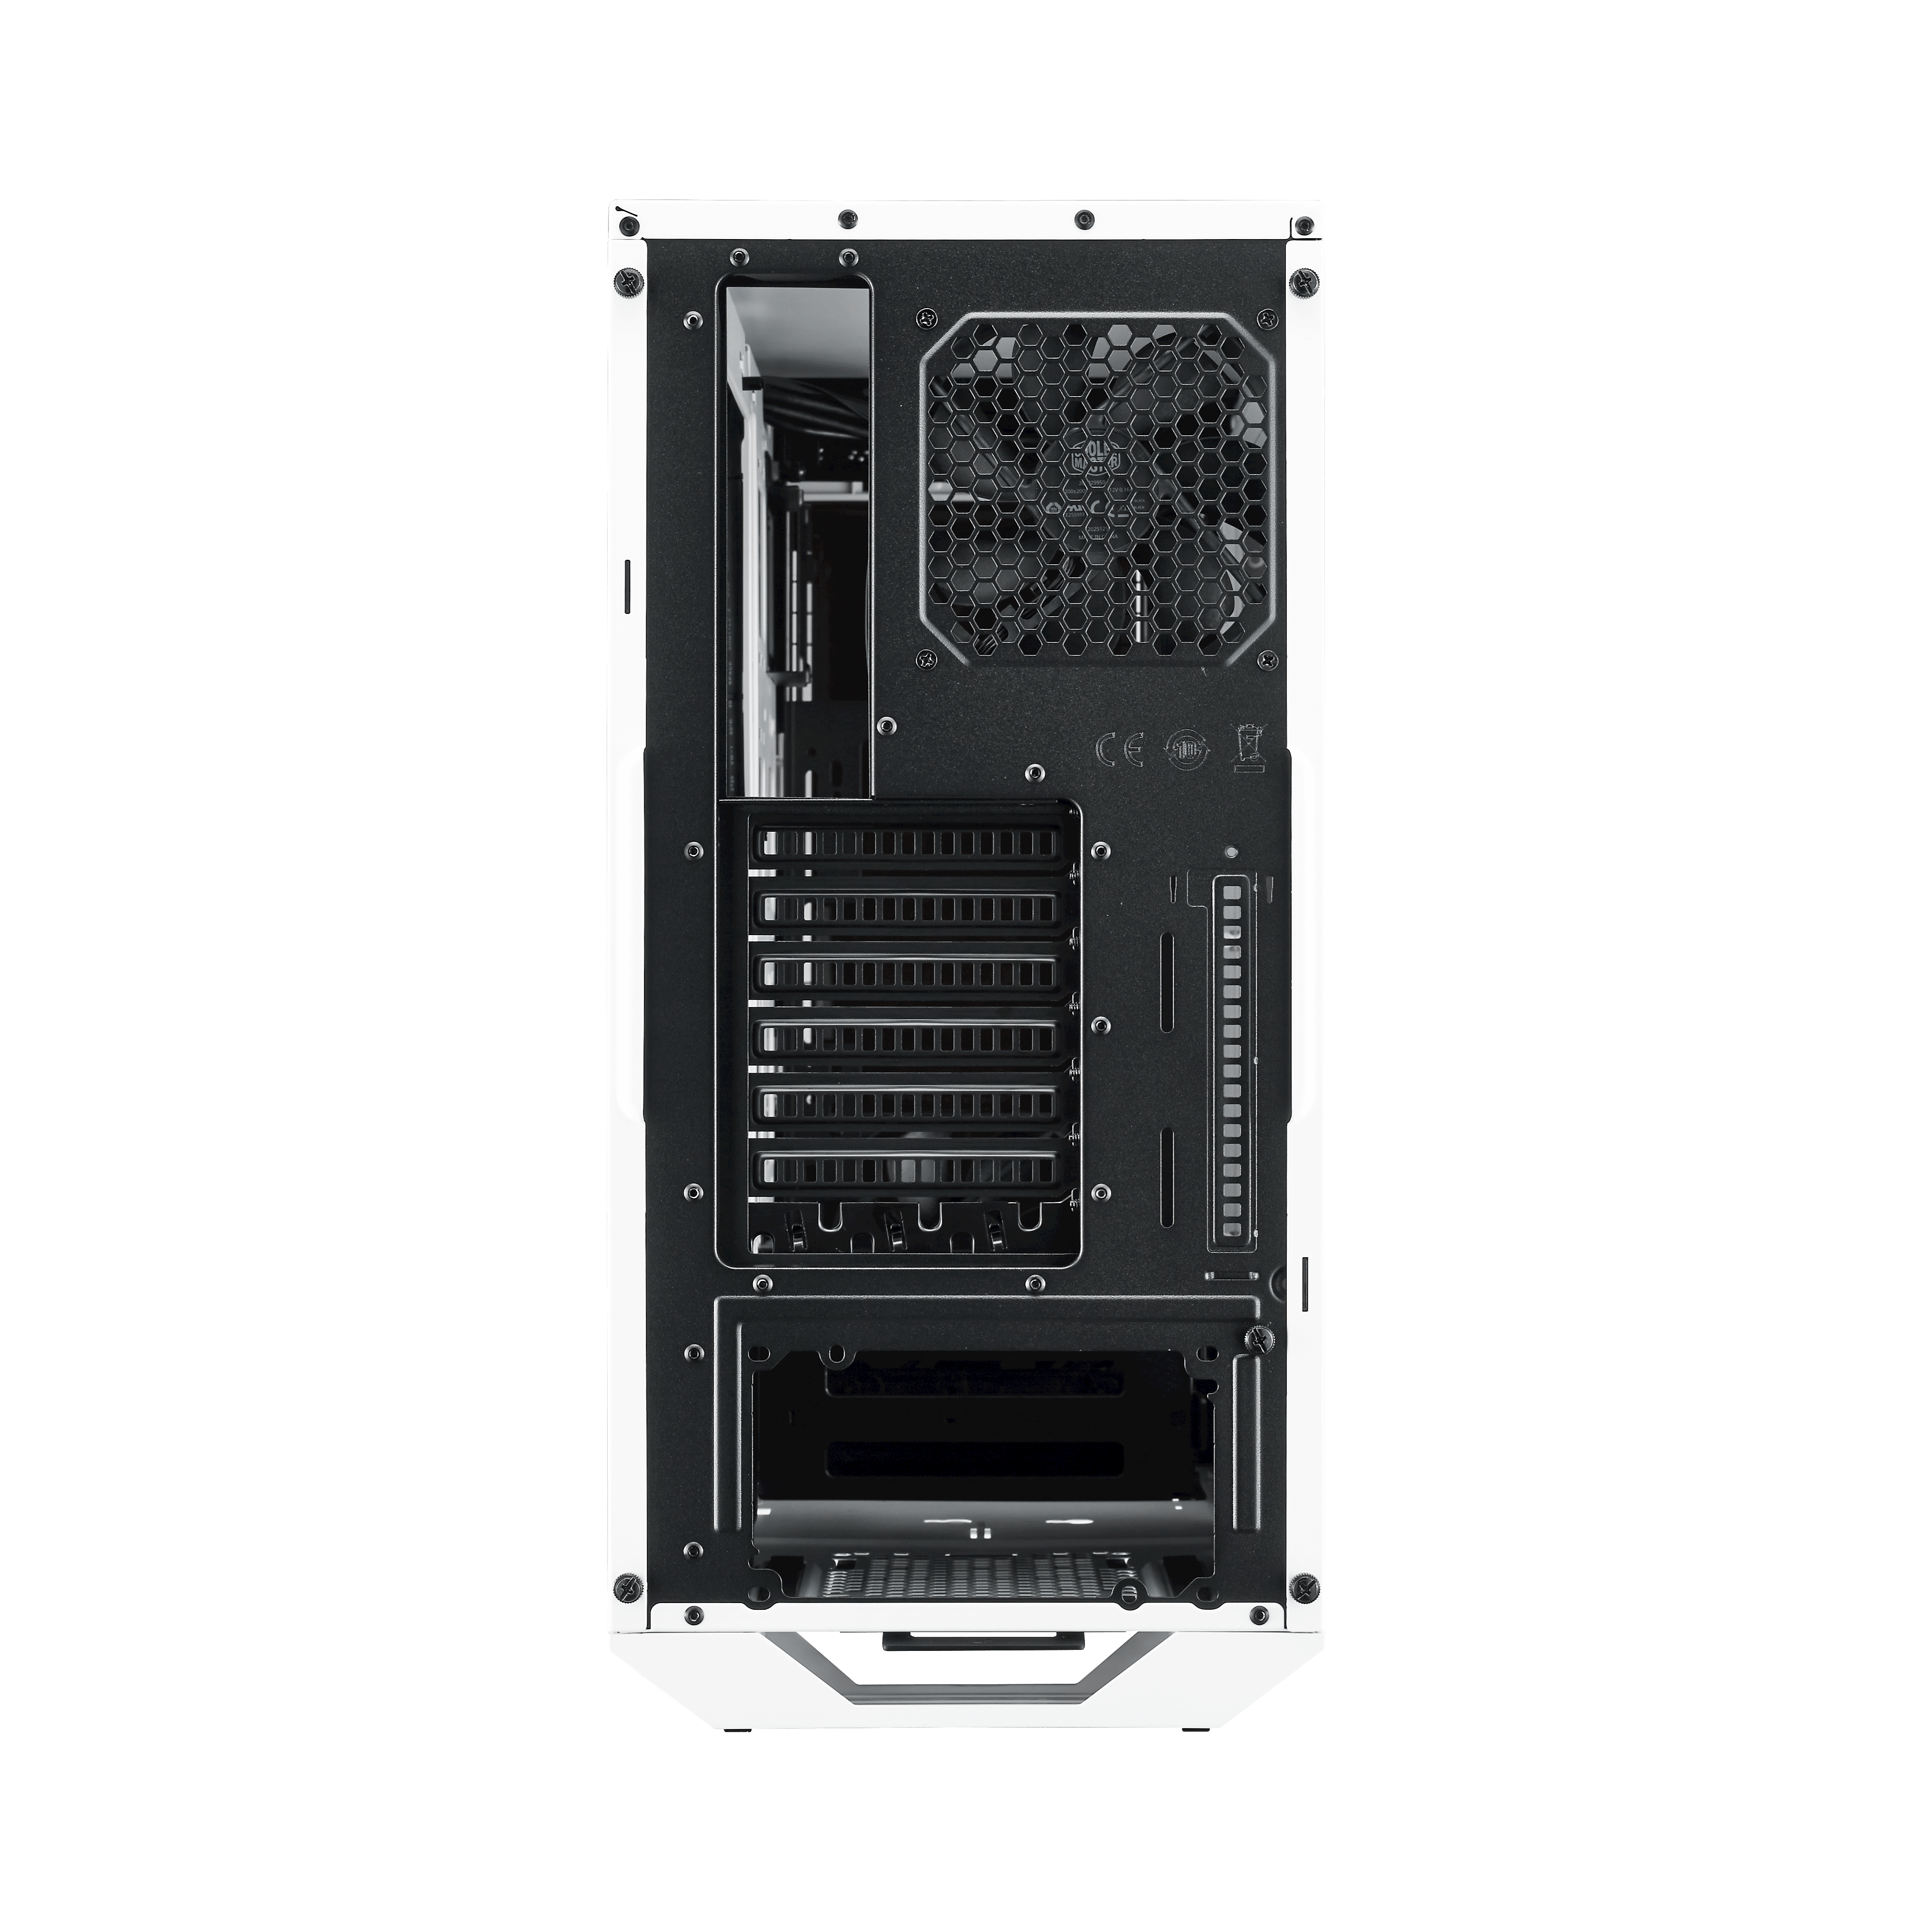 Cooler Master Masterbox 5 Mid-Tower Case (White)